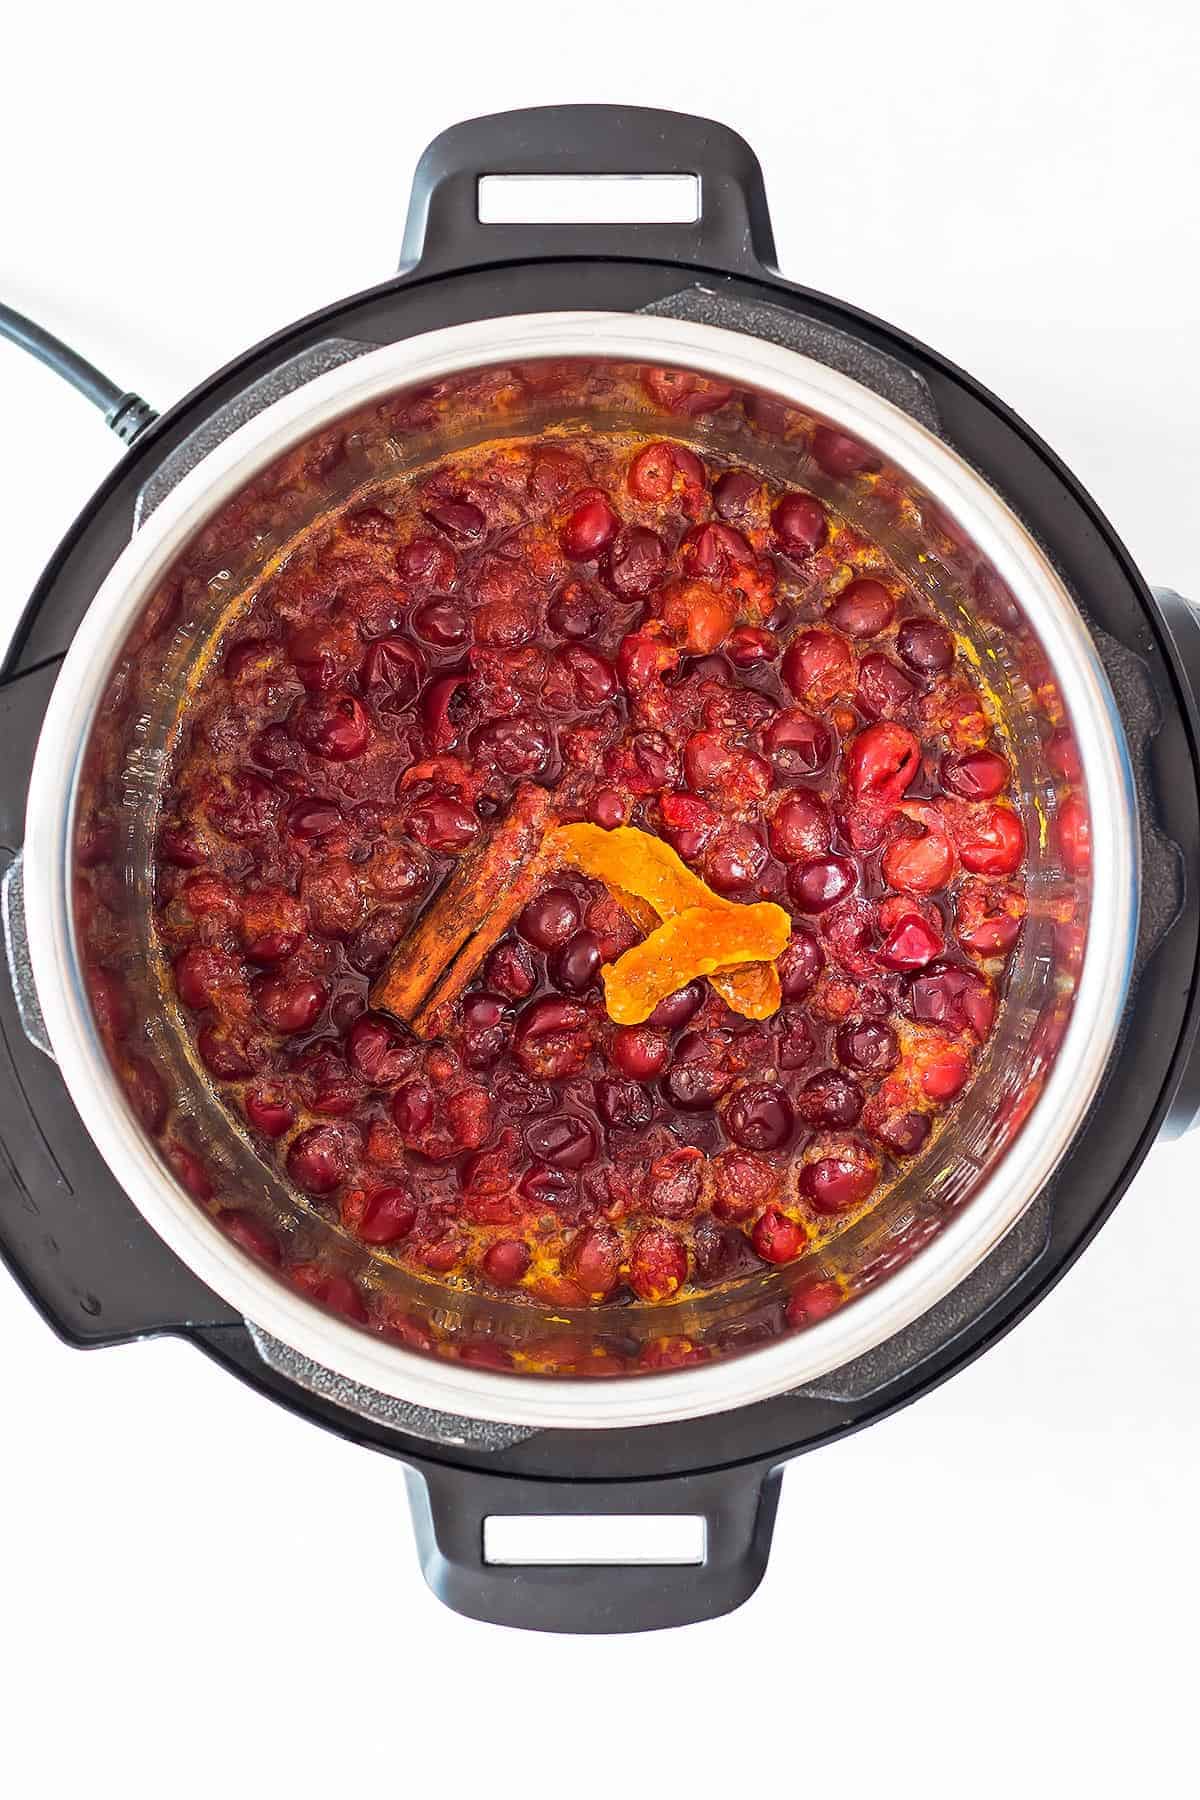 Cooked Instant Pot Cranberry Sauce